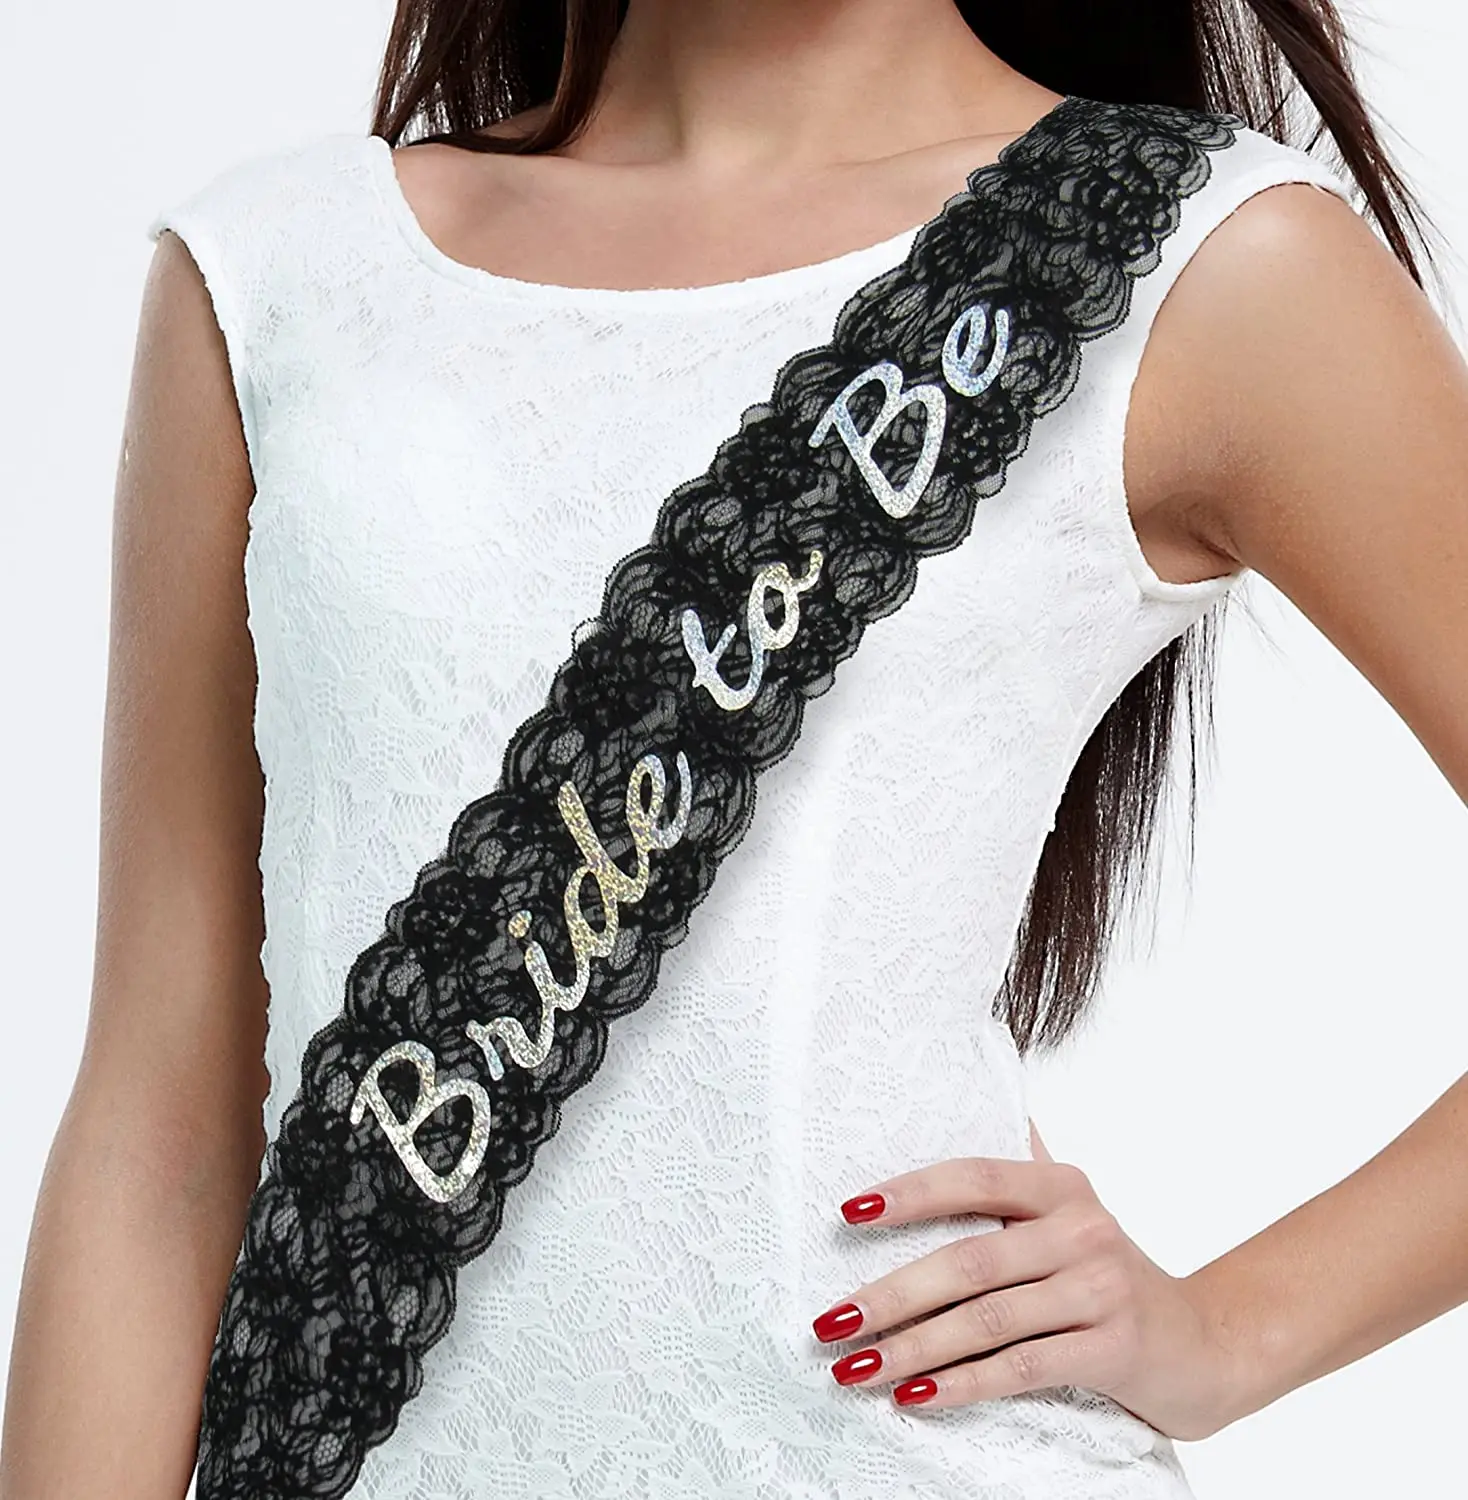 Bride to Be Black Lace Sash with Silver Sparkle Letters - Bachelorette  Parties, Bridal Showers, Girls' Night Out, Gifts - AliExpress